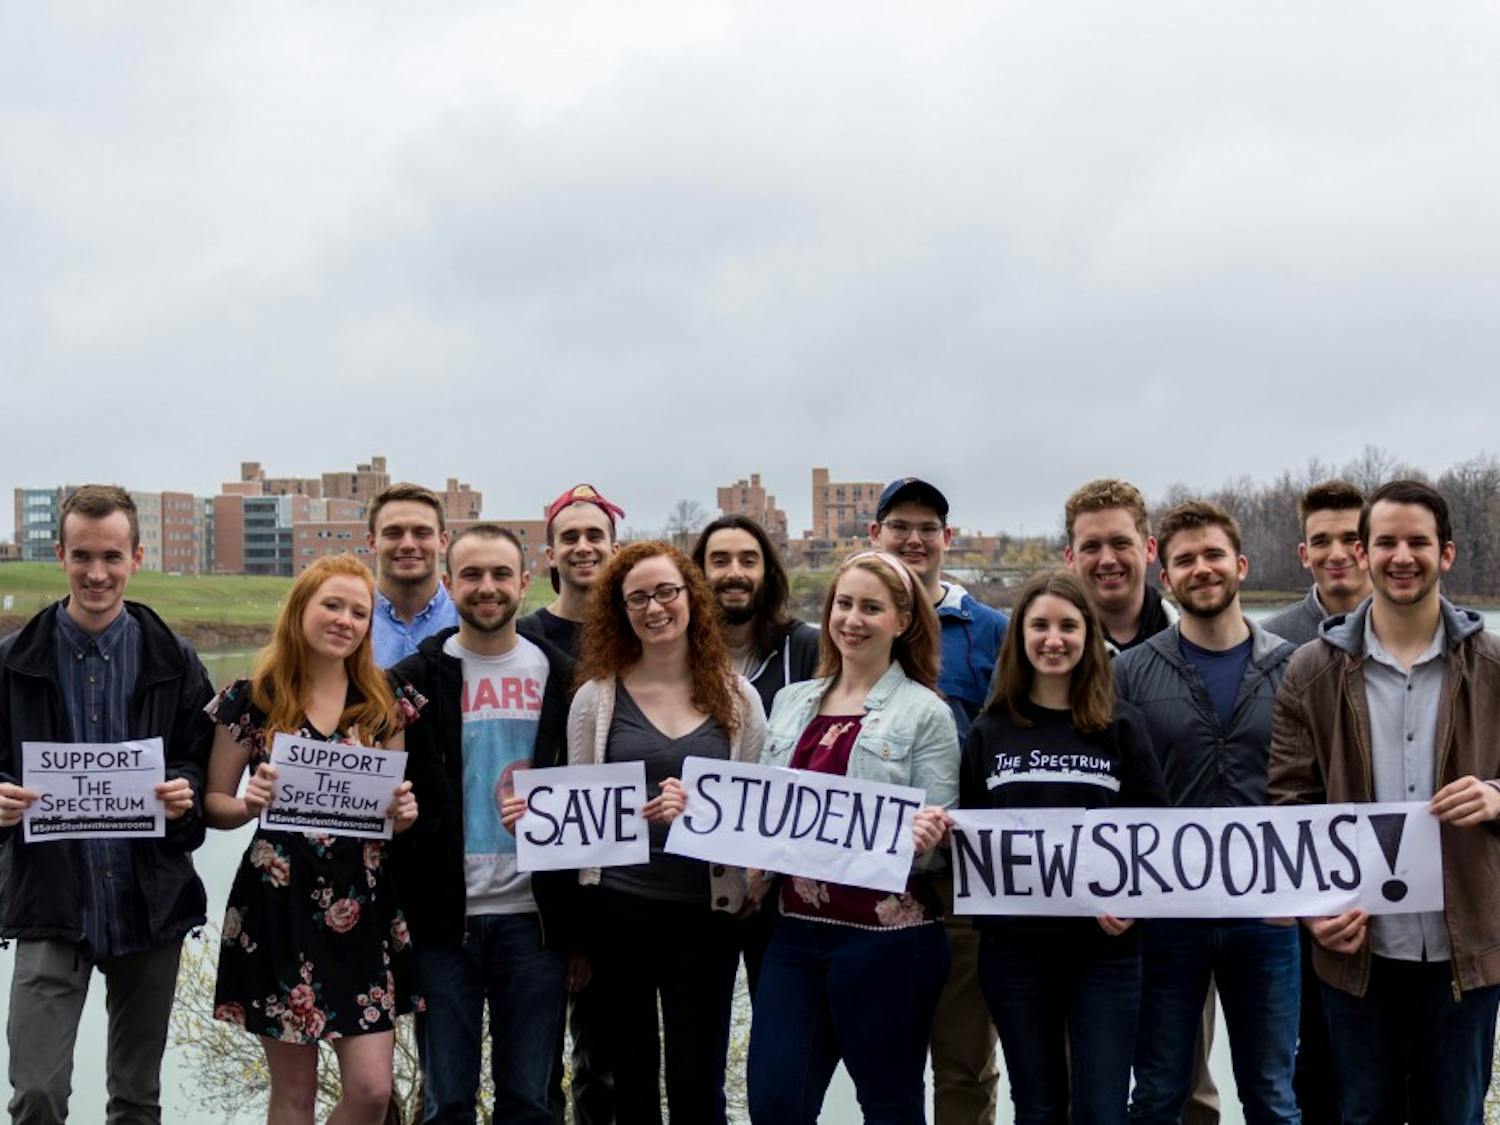 The Spectrum stands with the hashtag #SaveStudentNewsrooms movement. We stand in solidarity with more than 100 college publications across the country that are advocating for editorial freedom for student newspapers because we believe in the importance of student journalism.